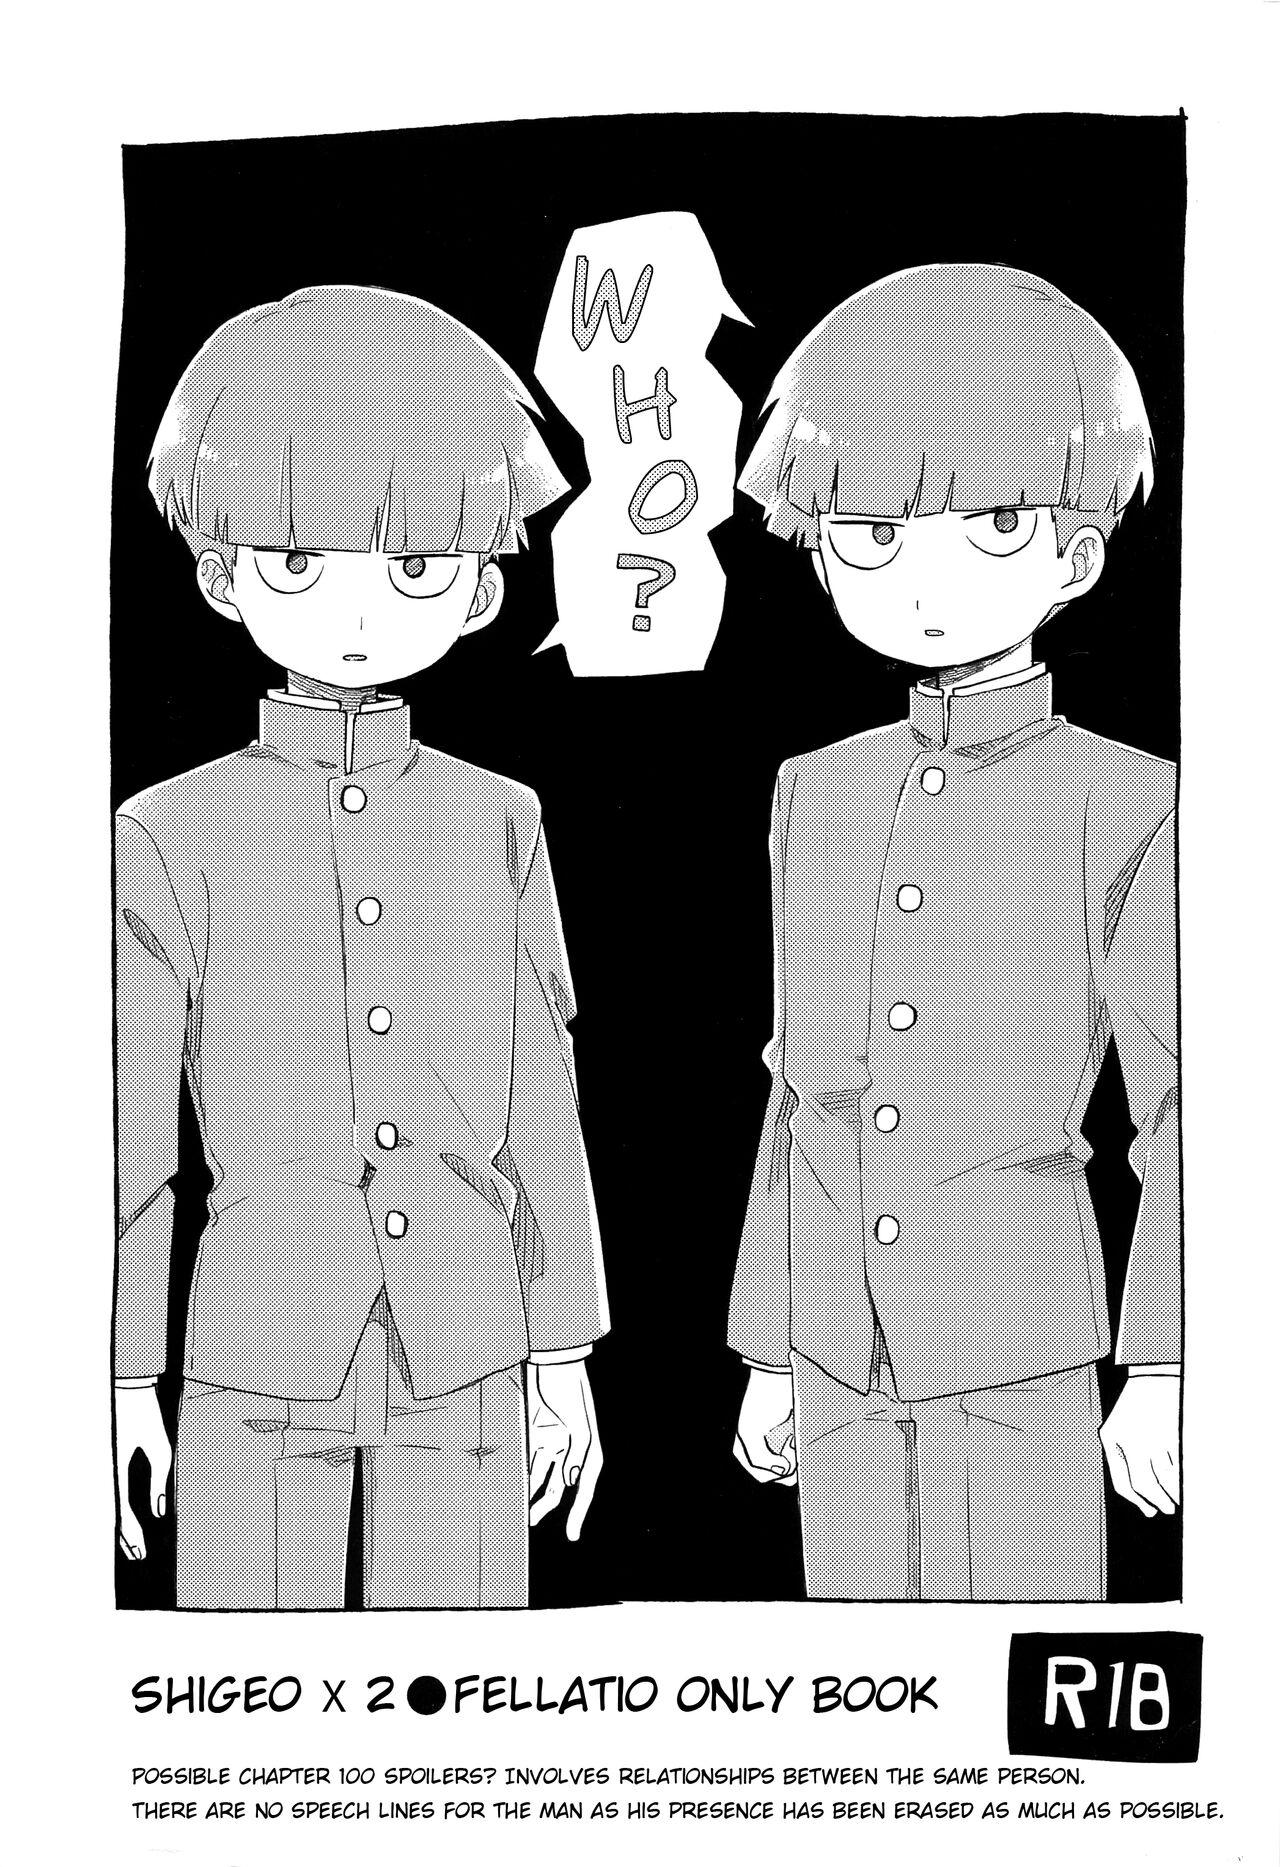 Blonde Dare? | Who? - Mob psycho 100 Chicks - Picture 1